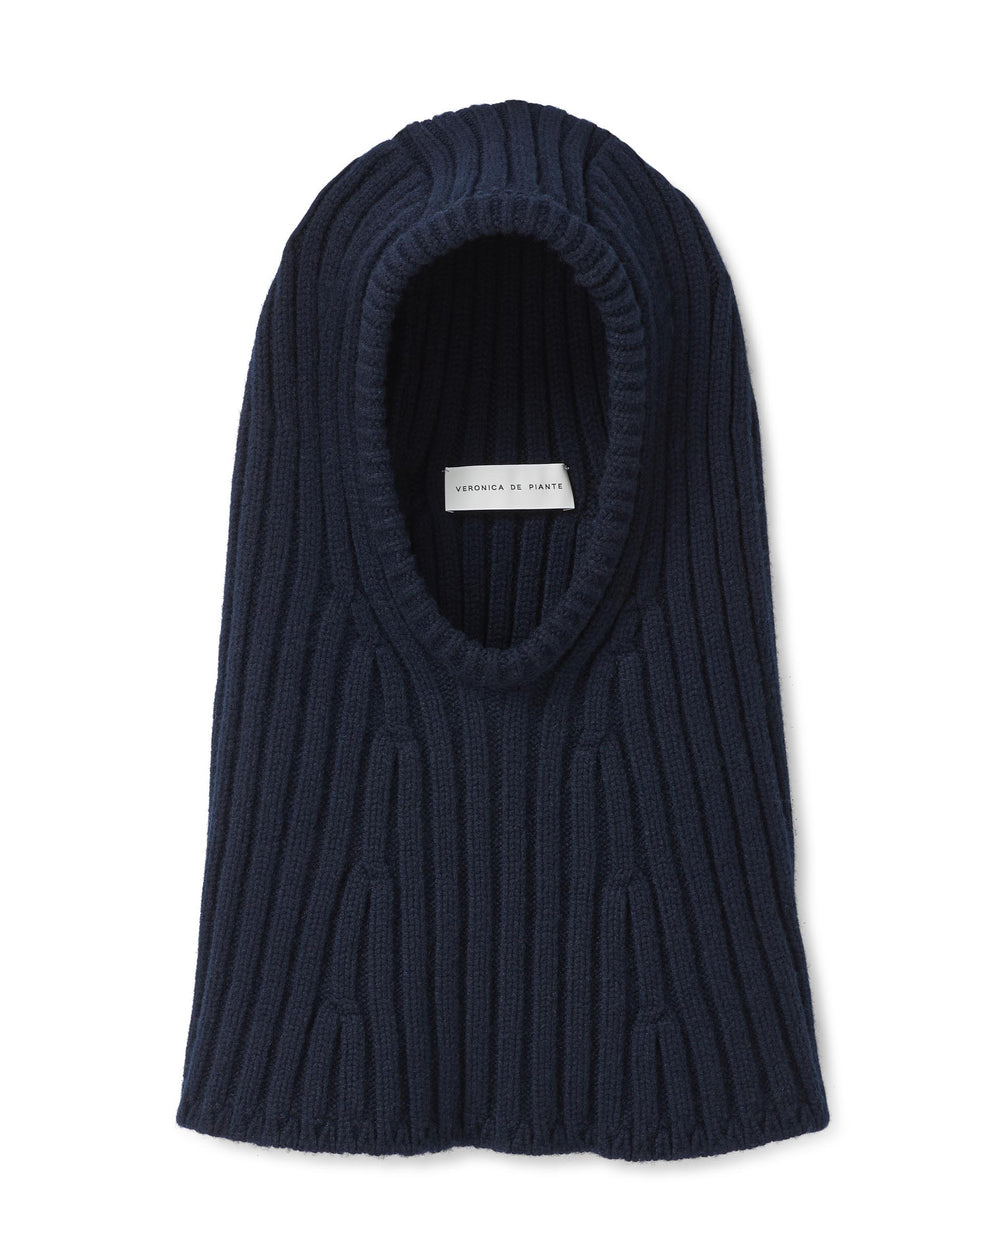 Aria Snood in Wool Cashmere, Navy